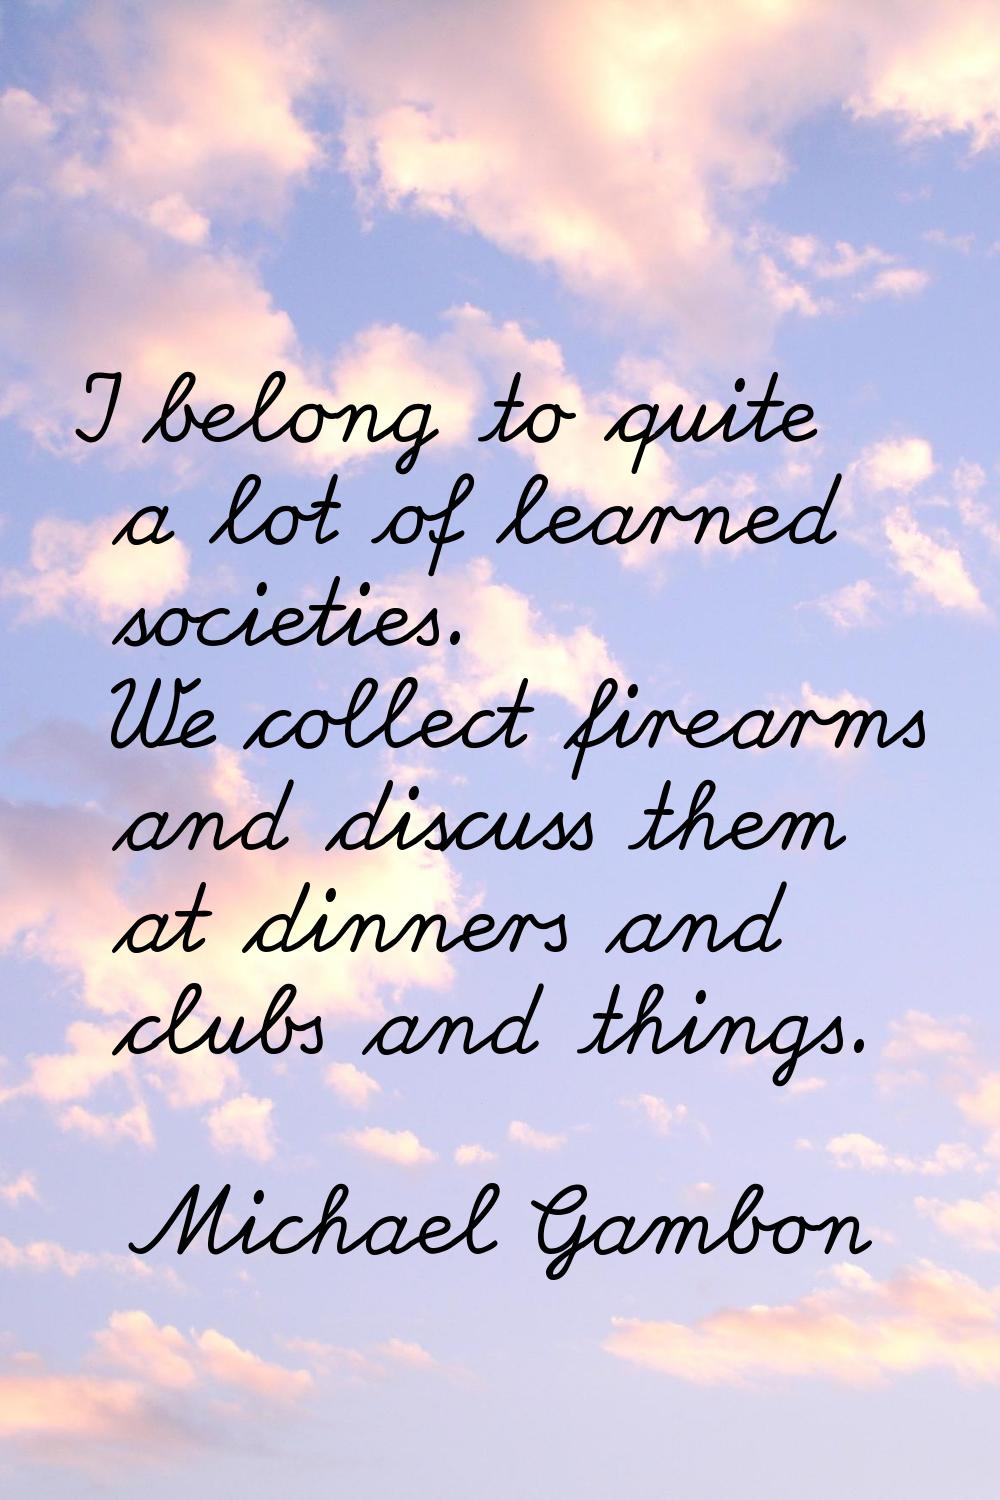 I belong to quite a lot of learned societies. We collect firearms and discuss them at dinners and c